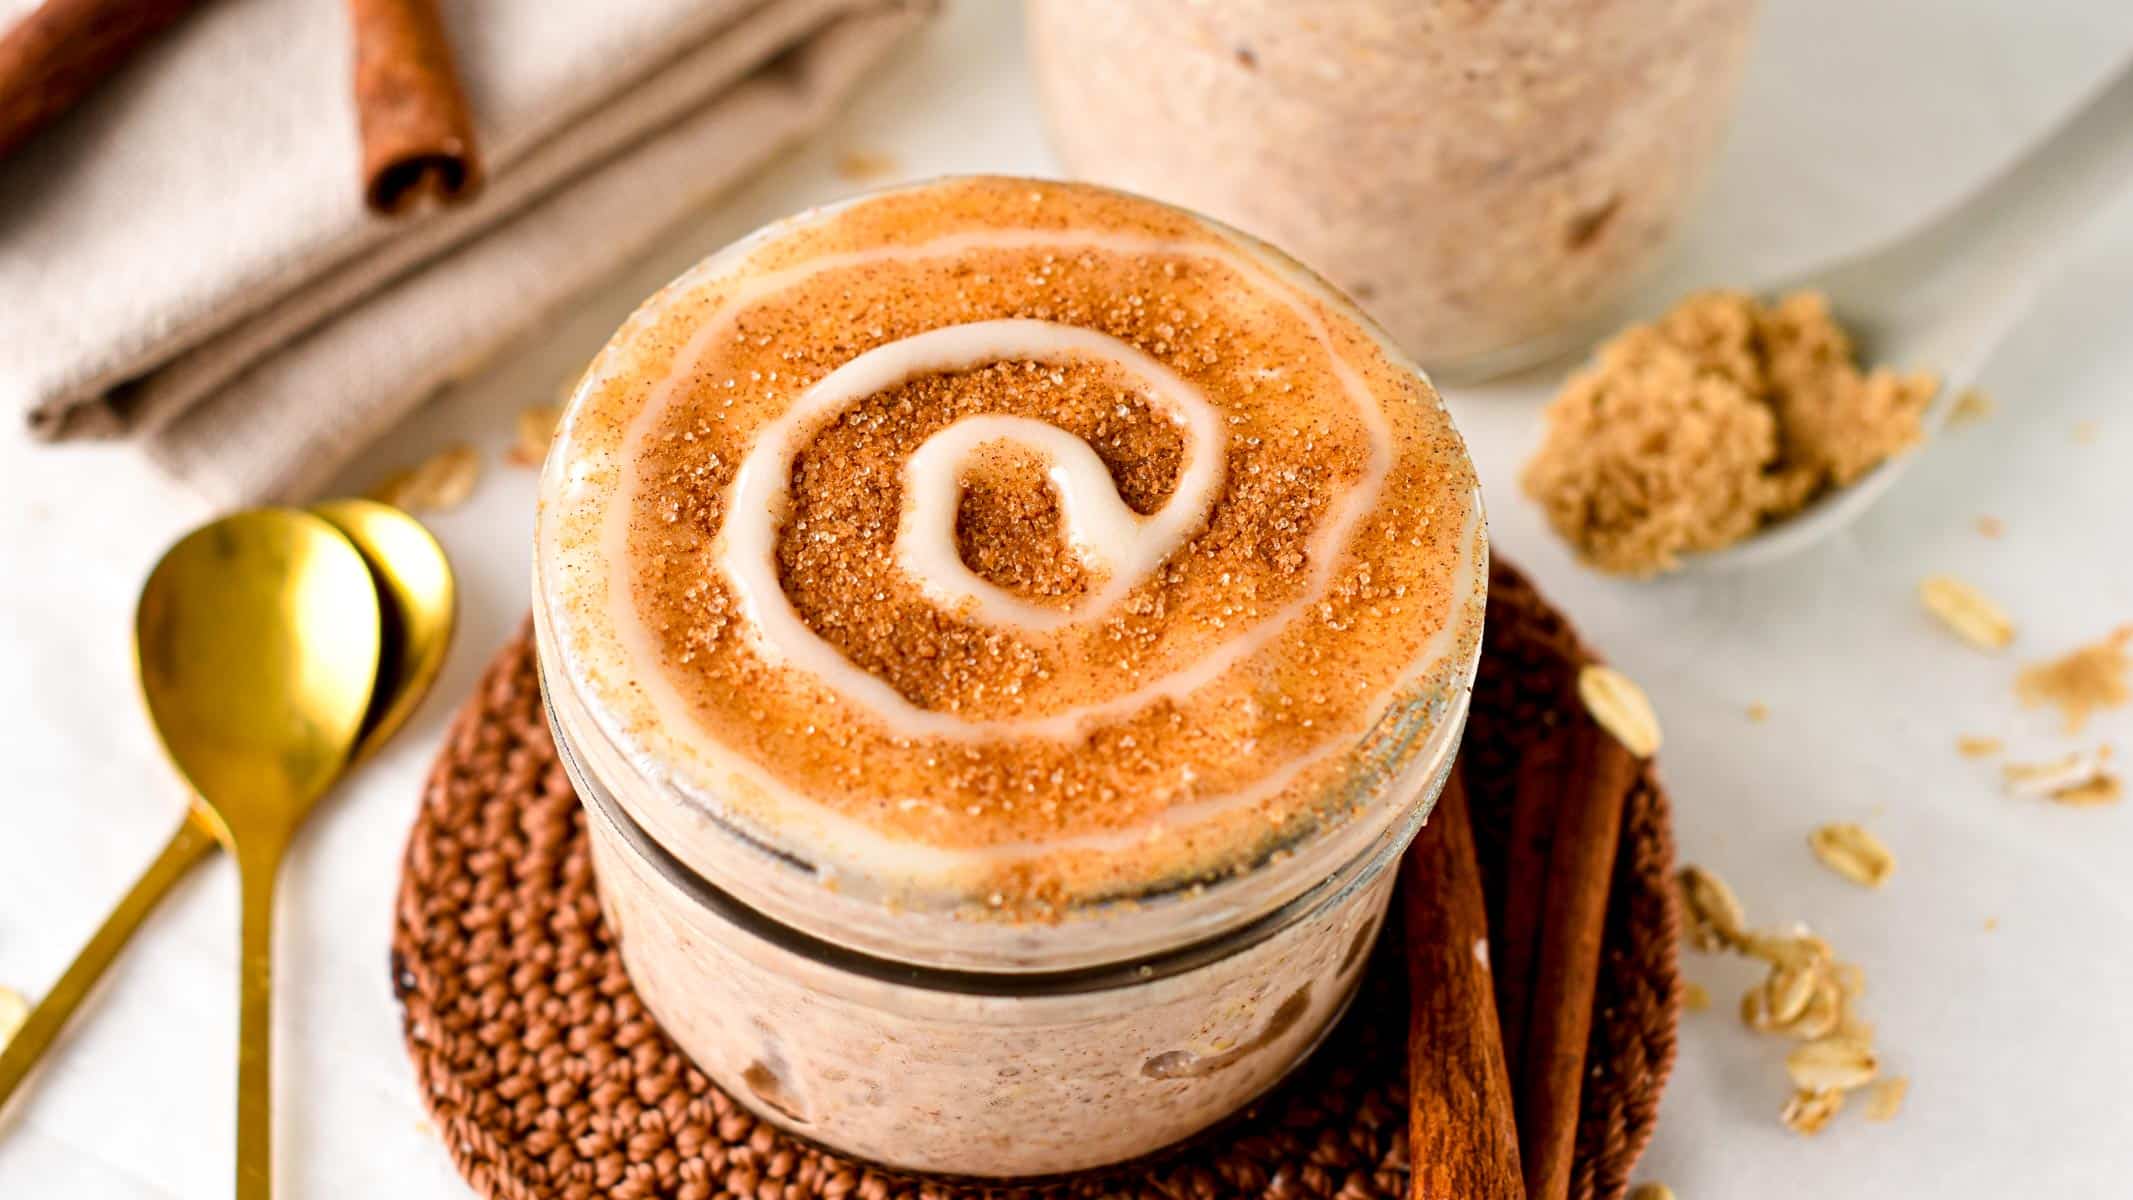 This Cinnamon Roll Overnight Oat is the most creamy, refreshing breakfast oatmeal recipe with all your favorite flavors of cinnamon rolls. If you love dessert for breakfast, this healthy breakfast is sure to impress.